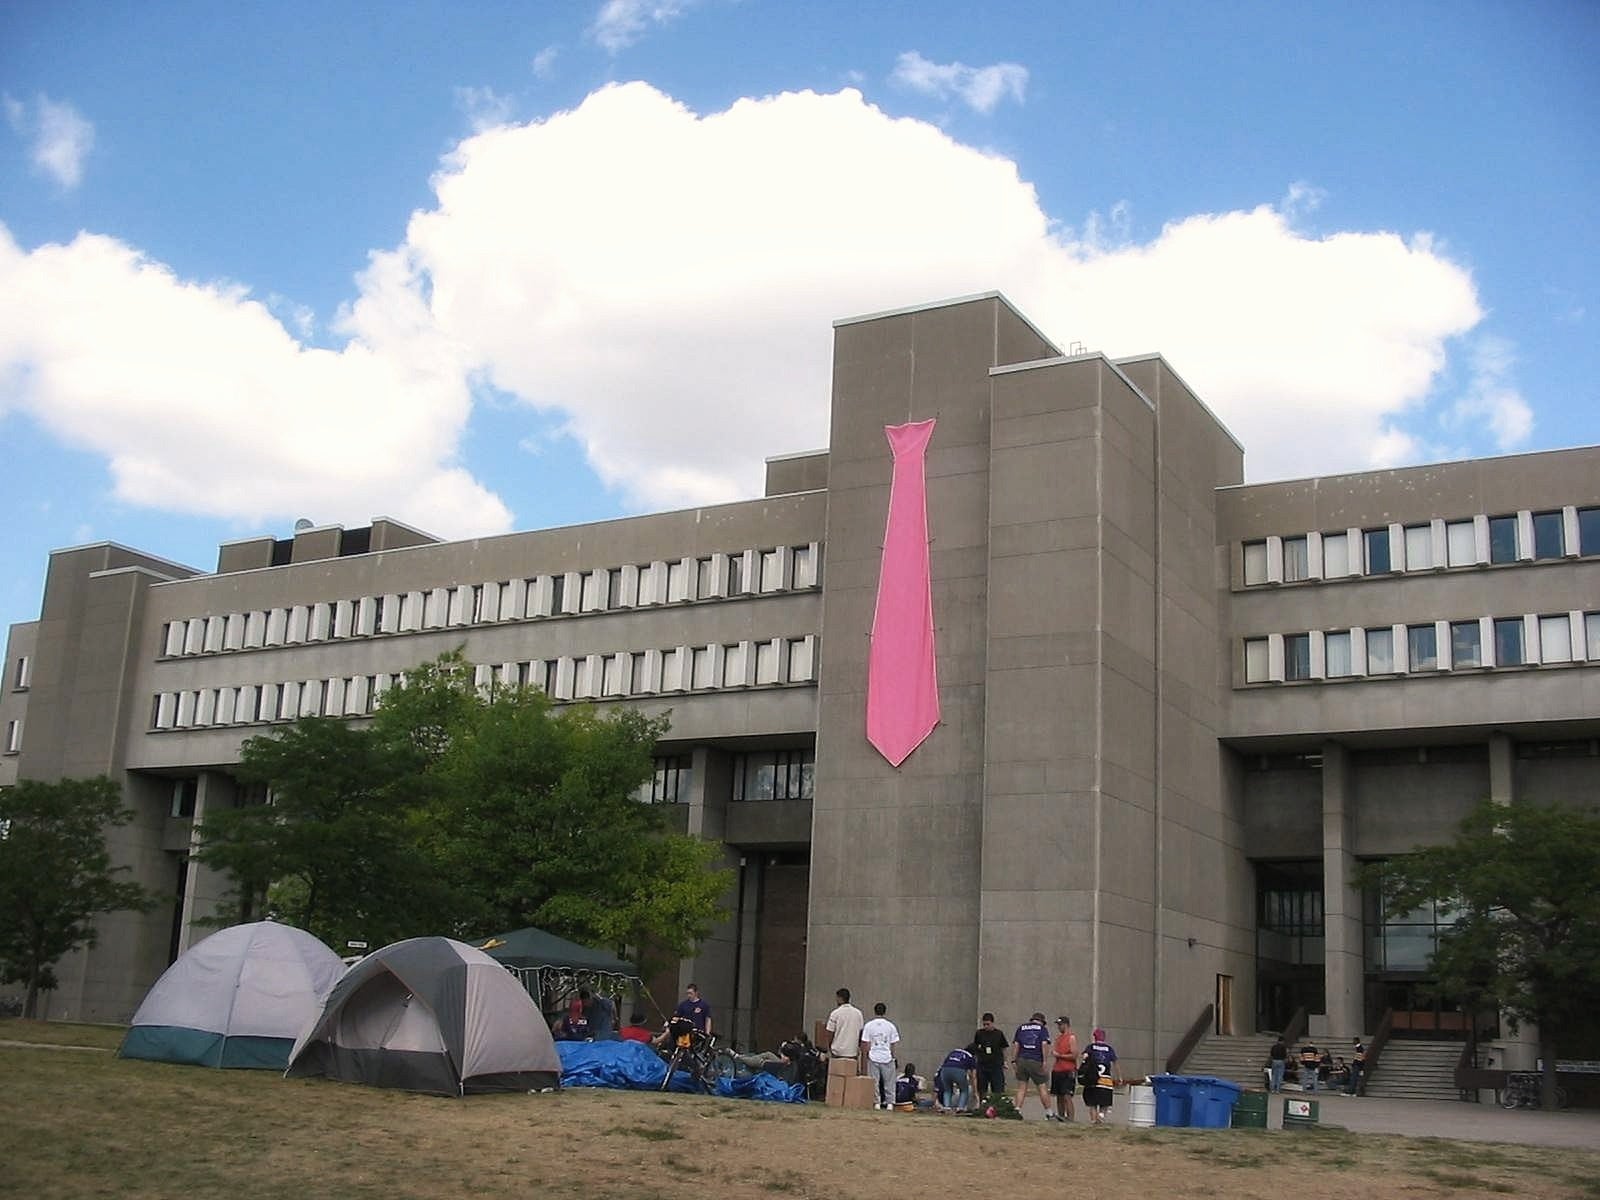 Math and Computer building with pink tie draped on the side